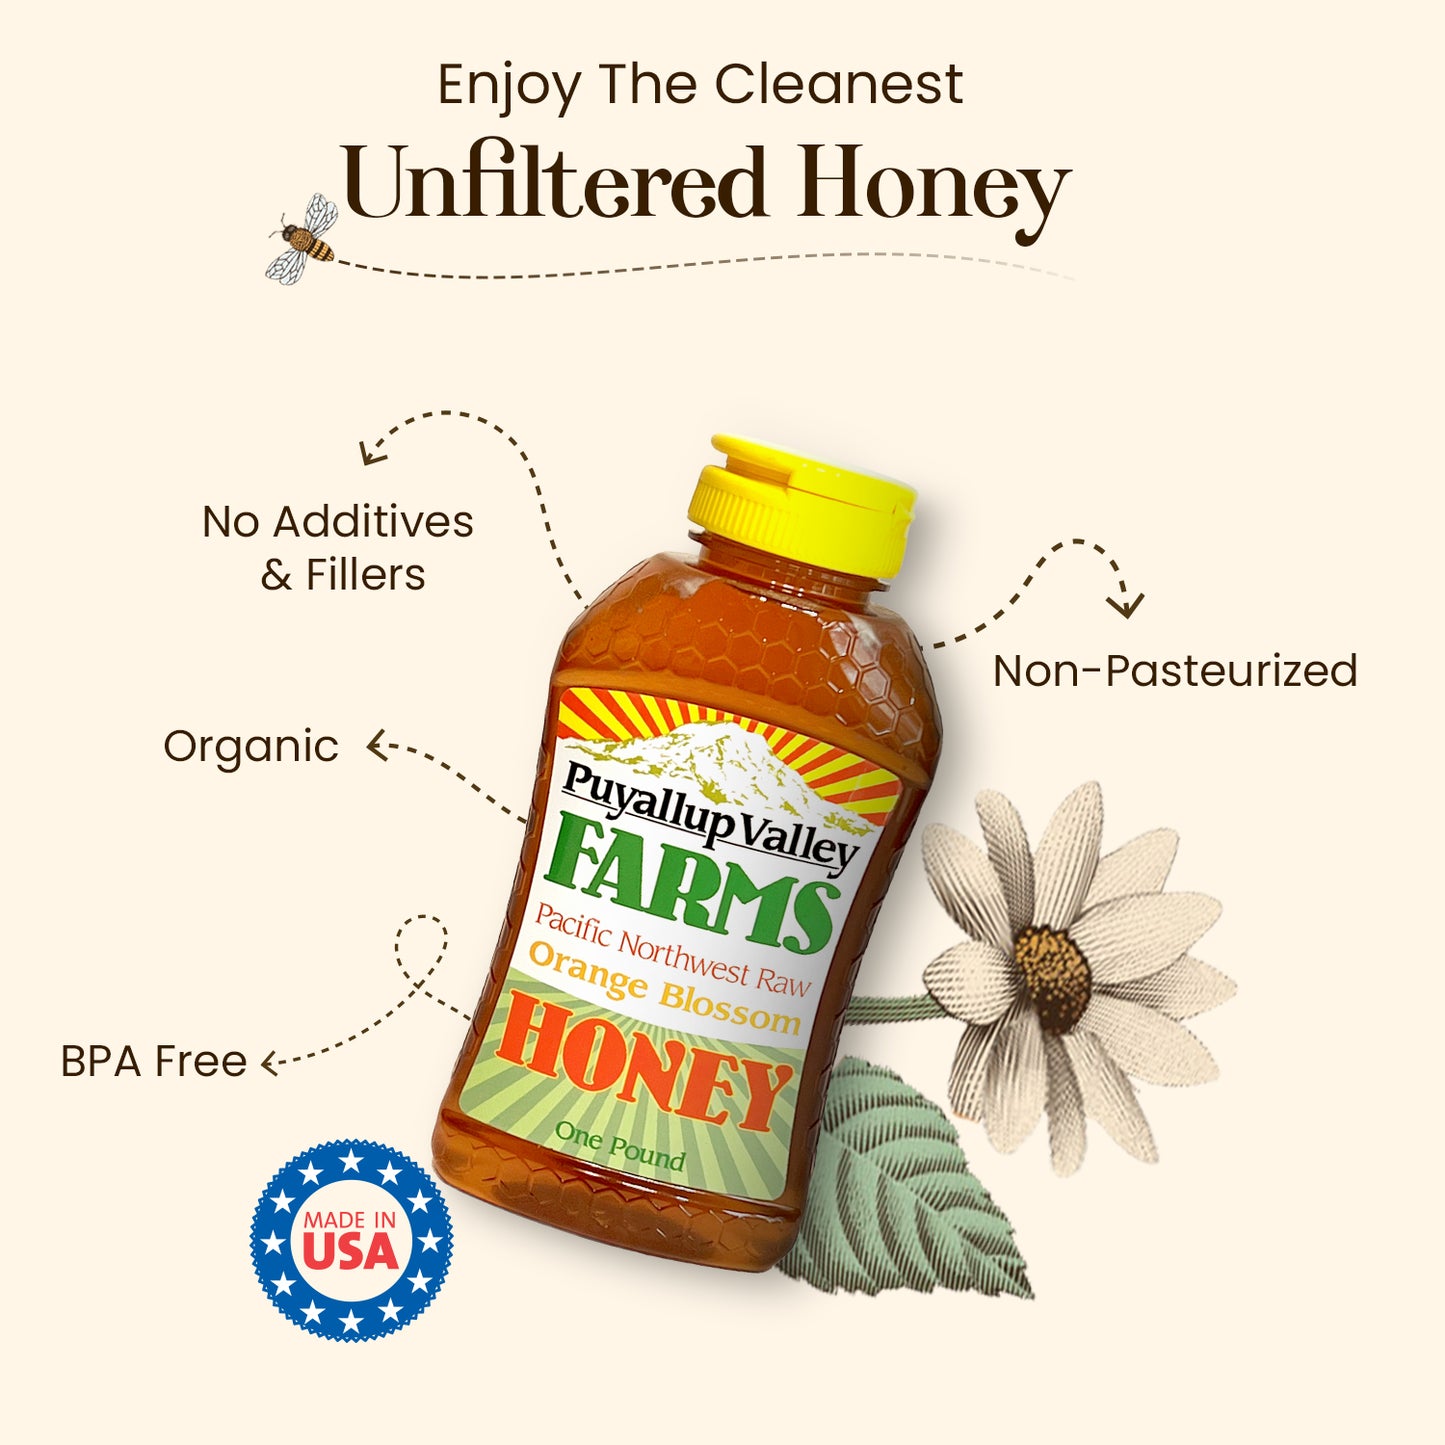 Orange Blossom Raw Honey by Puyallup Valley Farms | Organic Unfiltered Raw Honey | All-Natural Sweetener | No Additives | Non-Pasteurized Organic Raw Honey | BPA Free Raw Organic Honey Squeeze Bottle | No Drip Cap | FREE SHIPPING Orange Blossom 16 Oz